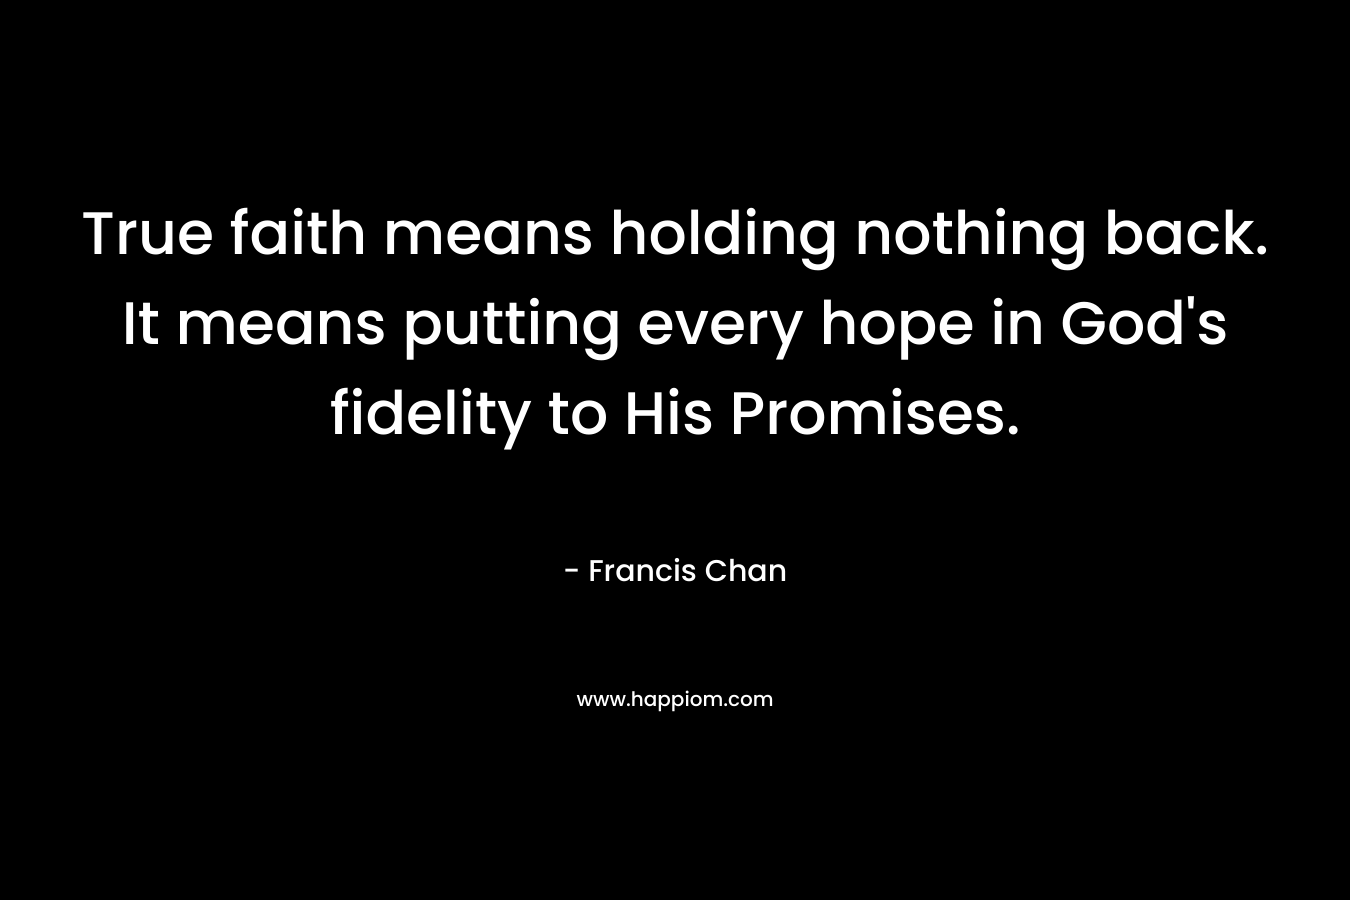 True faith means holding nothing back. It means putting every hope in God’s fidelity to His Promises. – Francis Chan